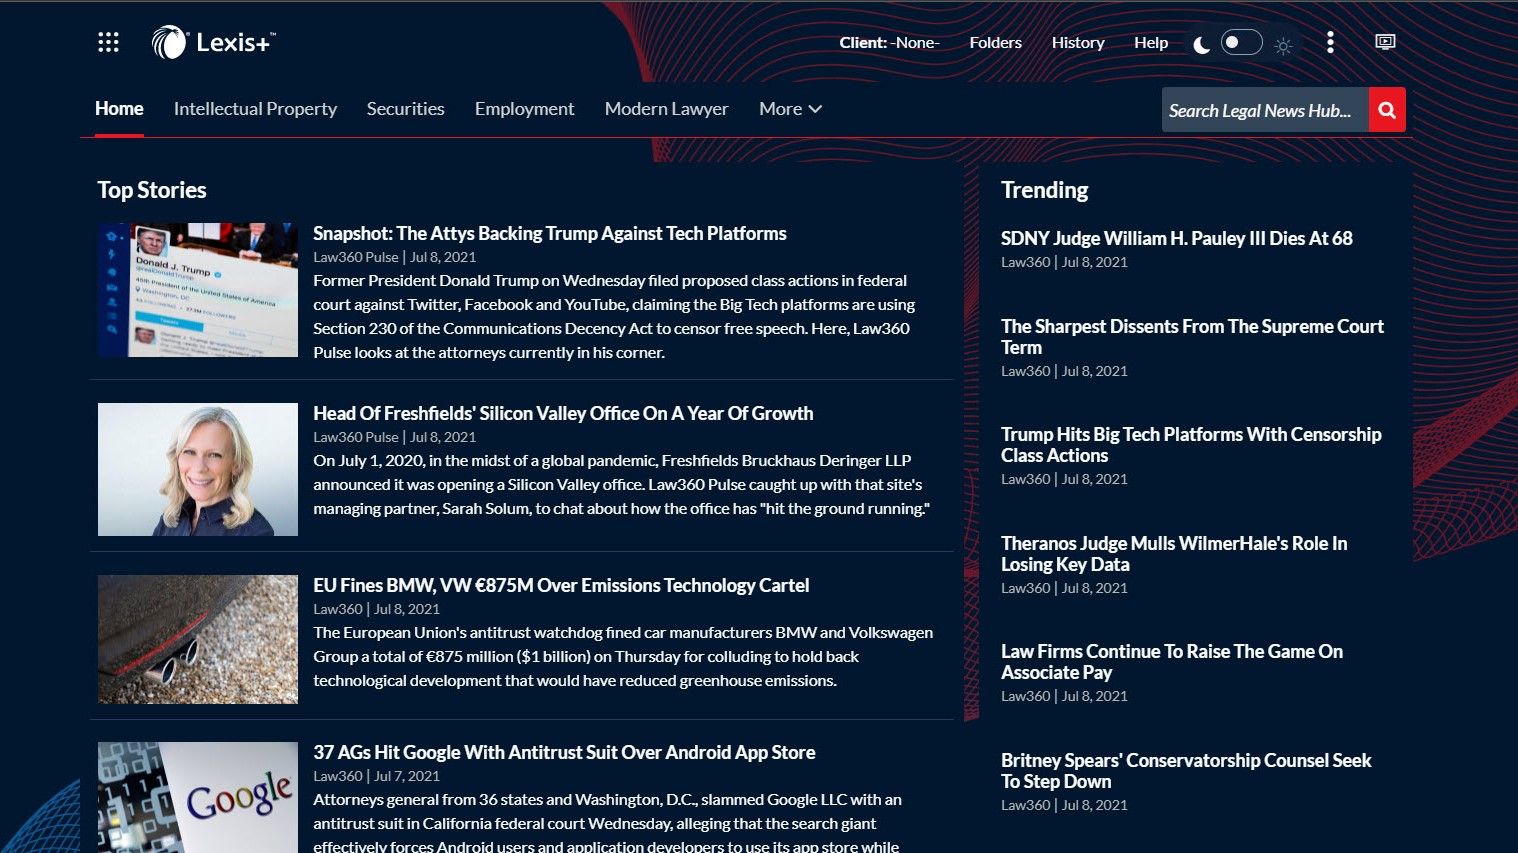 New &#8216;Legal News Hub&#8217; Adds Breaking News In 76 Practice Areas To Lexis+